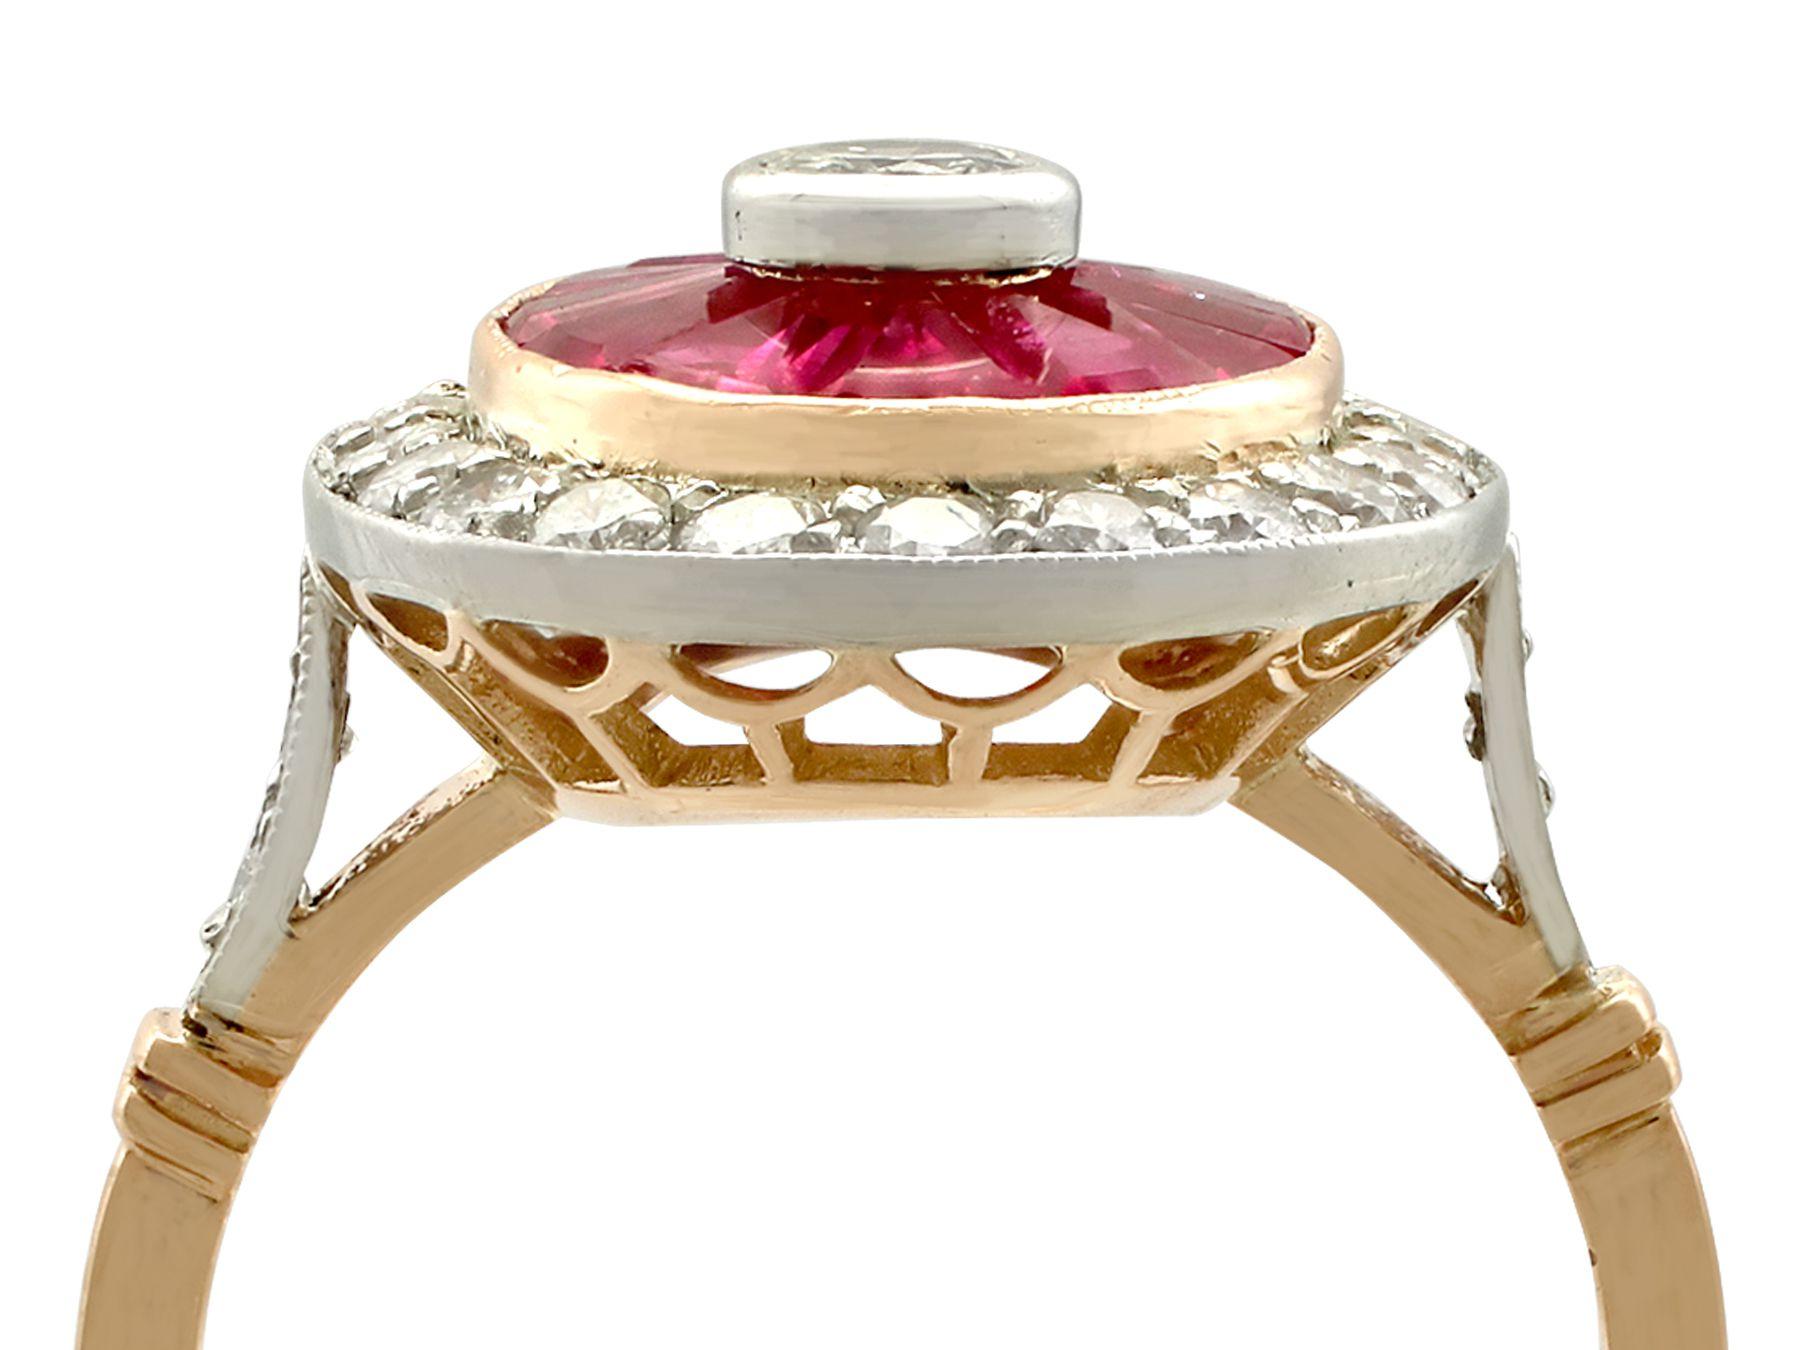 An impressive vintage French 1.30 carat ruby and 0.90 carat diamond, 18 karat yellow and white gold dress ring; part of our diverse vintage jewelry and estate jewelry collections.

This fine and impressive French ruby and diamond ring has been